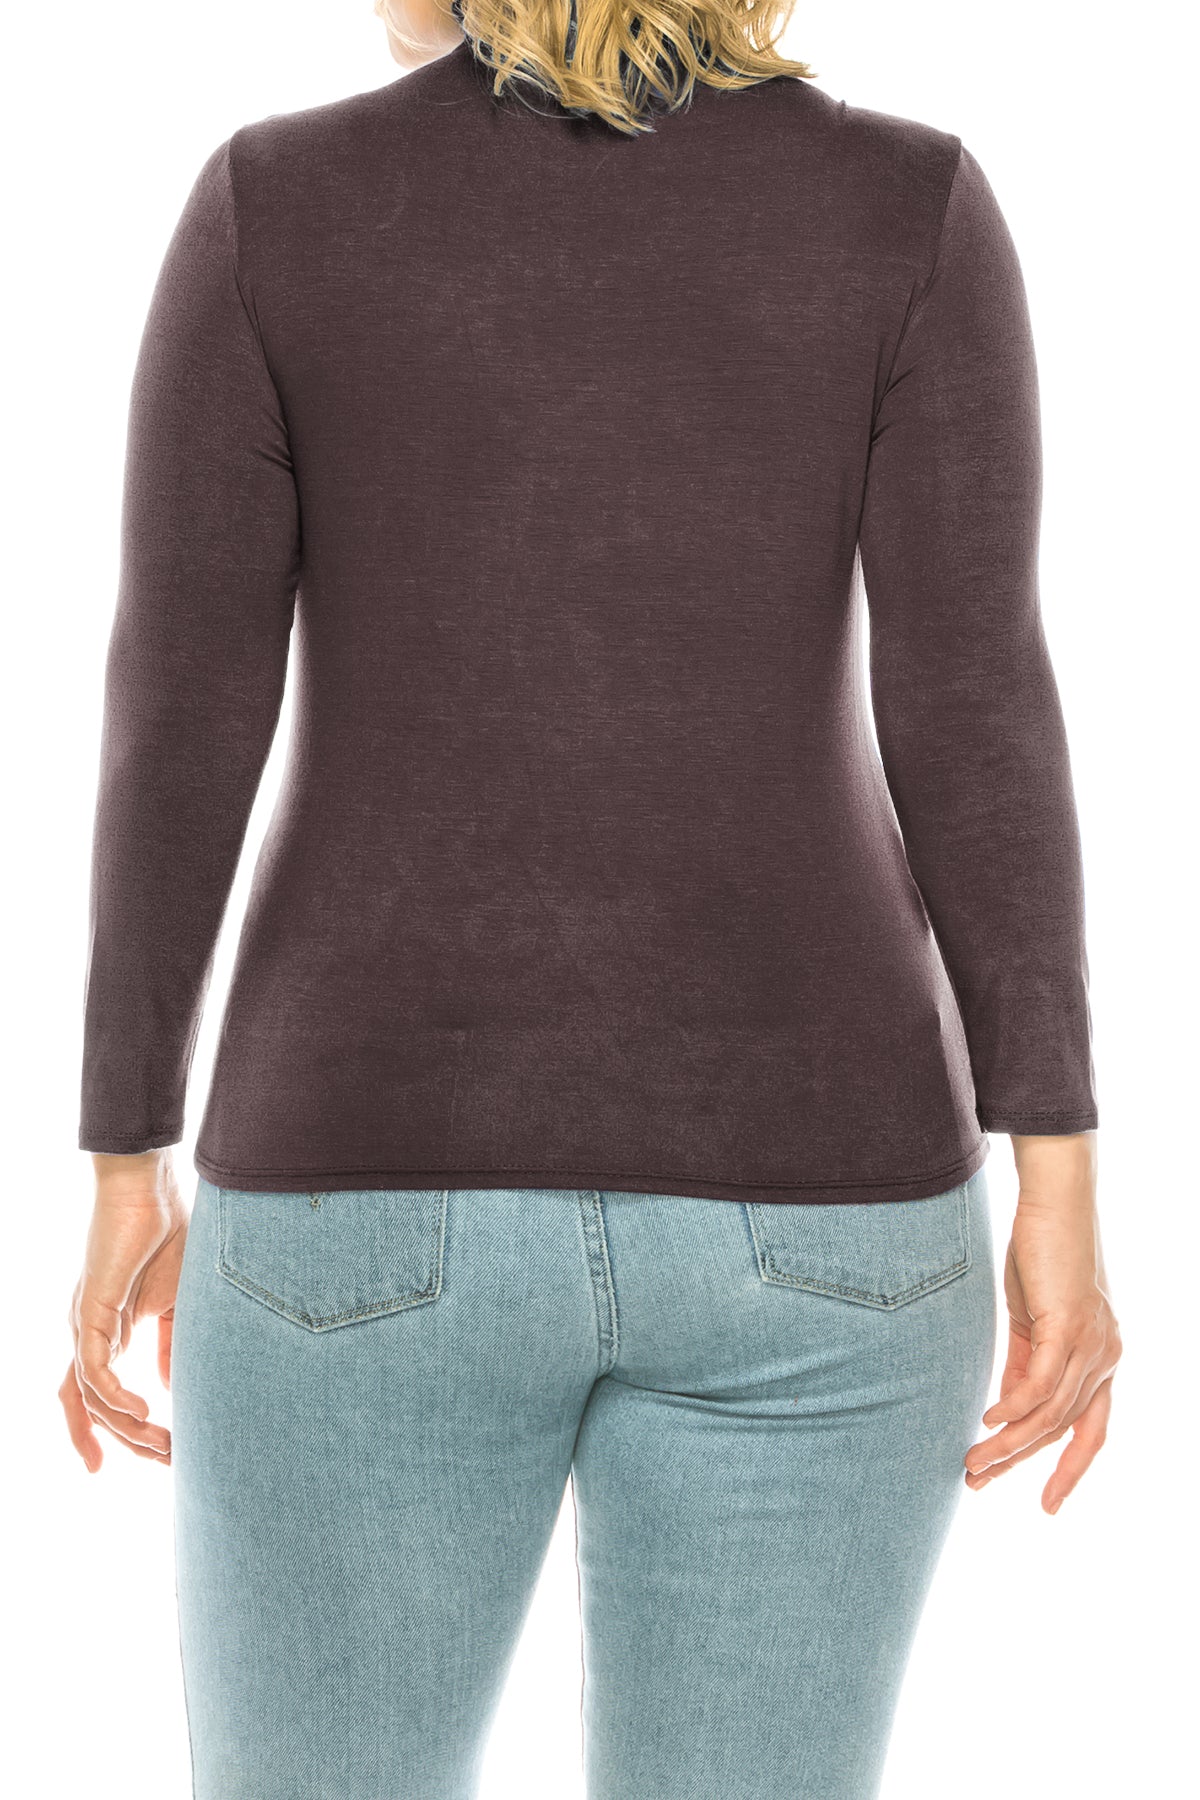 Women's Plus Size Casual Fitted Long Sleeve Solid Turtleneck Sweater Tops Shirts